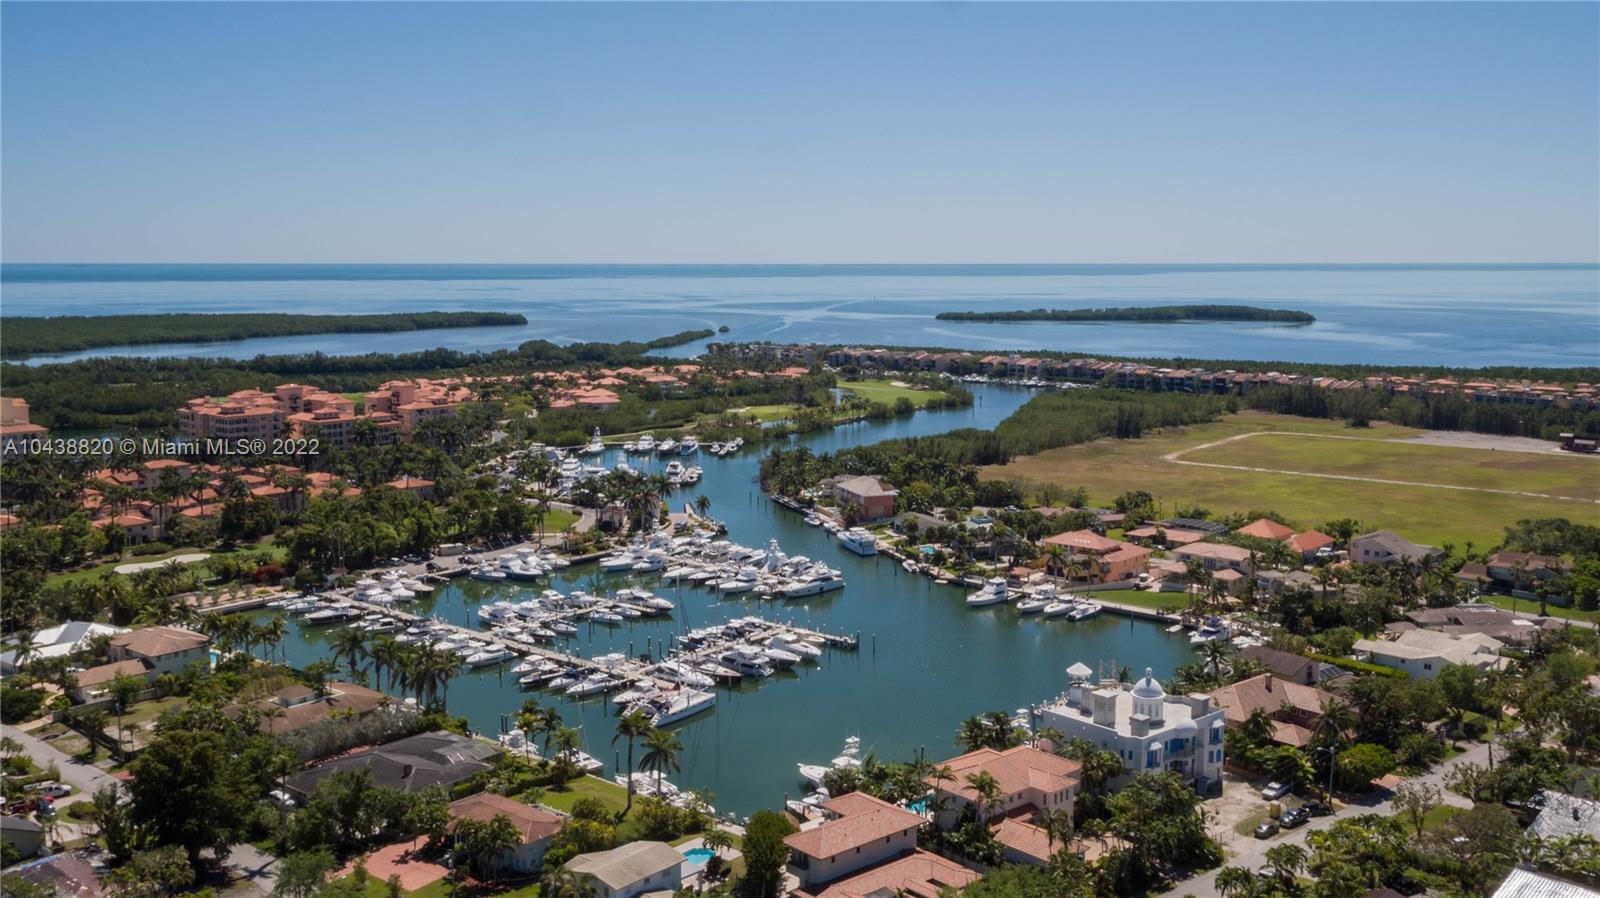 Just minutes to the bay from a private dock - rarely available gorgeous waterfront home with stunning Wide Views of the Deering Bay Marina and deep water lagoon - 100' sea wall accommodates five 50' boats - no bridges to bay or ocean. Located in prestigious Coral Gables gated community of Kings Bay Estates. Features striking interior spaces, several balconies, formal dining, gourmet kitchen with cooking island, soaring ceilings, over-sized rooms, sweeping staircase, first level is a 3300 SF garage for 8 plus exotic or otherwise personal vehicles, elevator from garage to upper level interiors, and a 24/7 recorded nine camera security system . Incredible for ardent car and boat enthusiast.